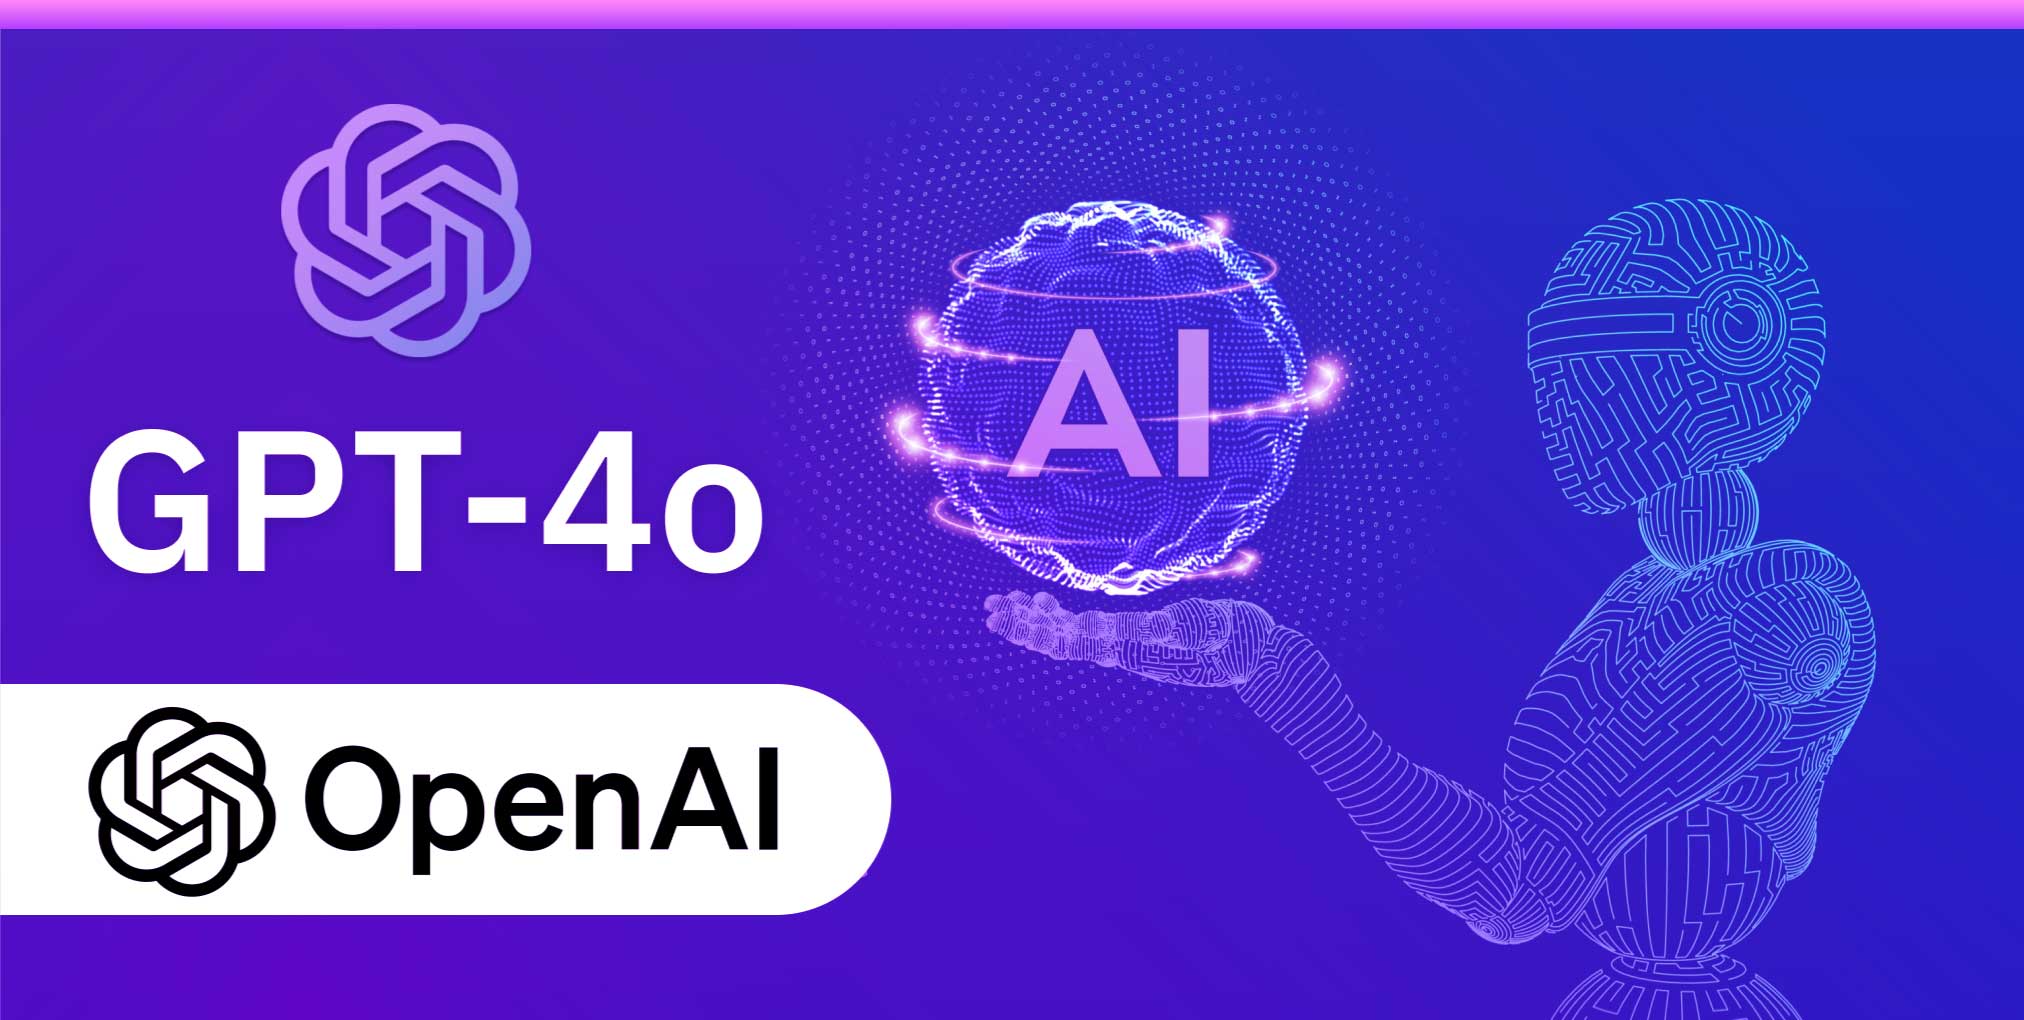 Introducing GPT-4o: OpenAI’s New AI Model – How to Access It